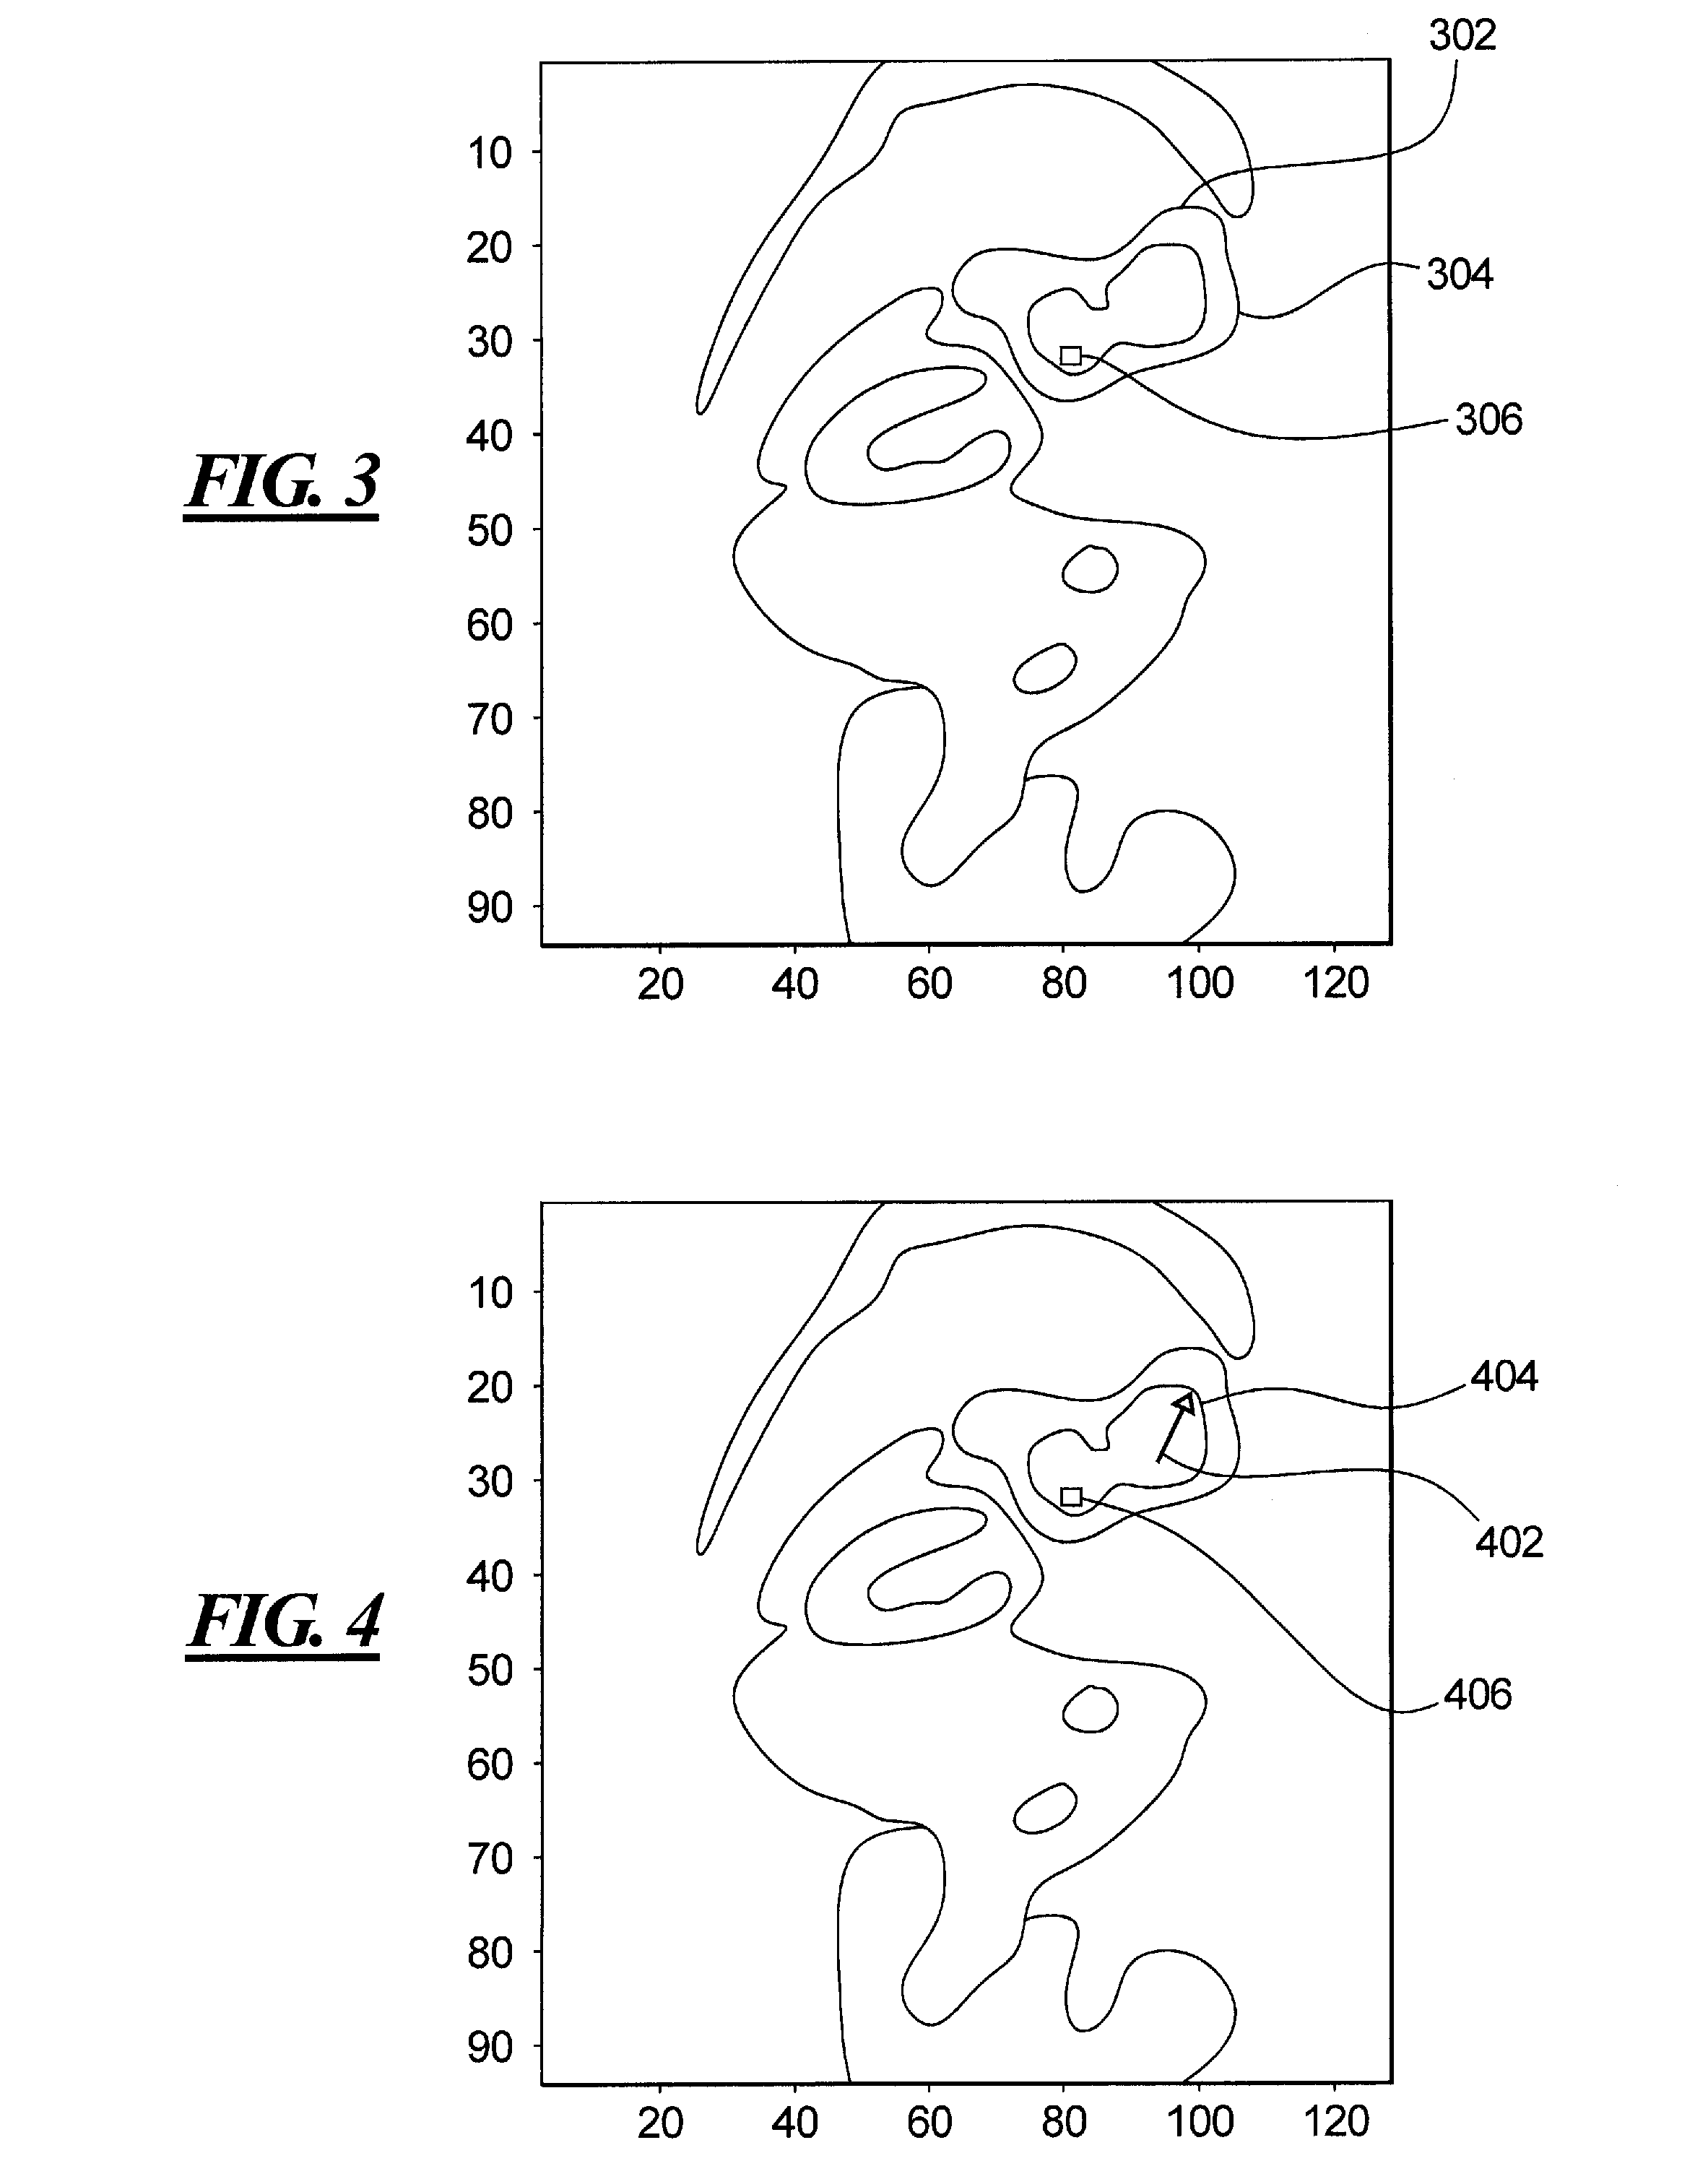 Method and apparatus for identifying regions of interest in a medical image